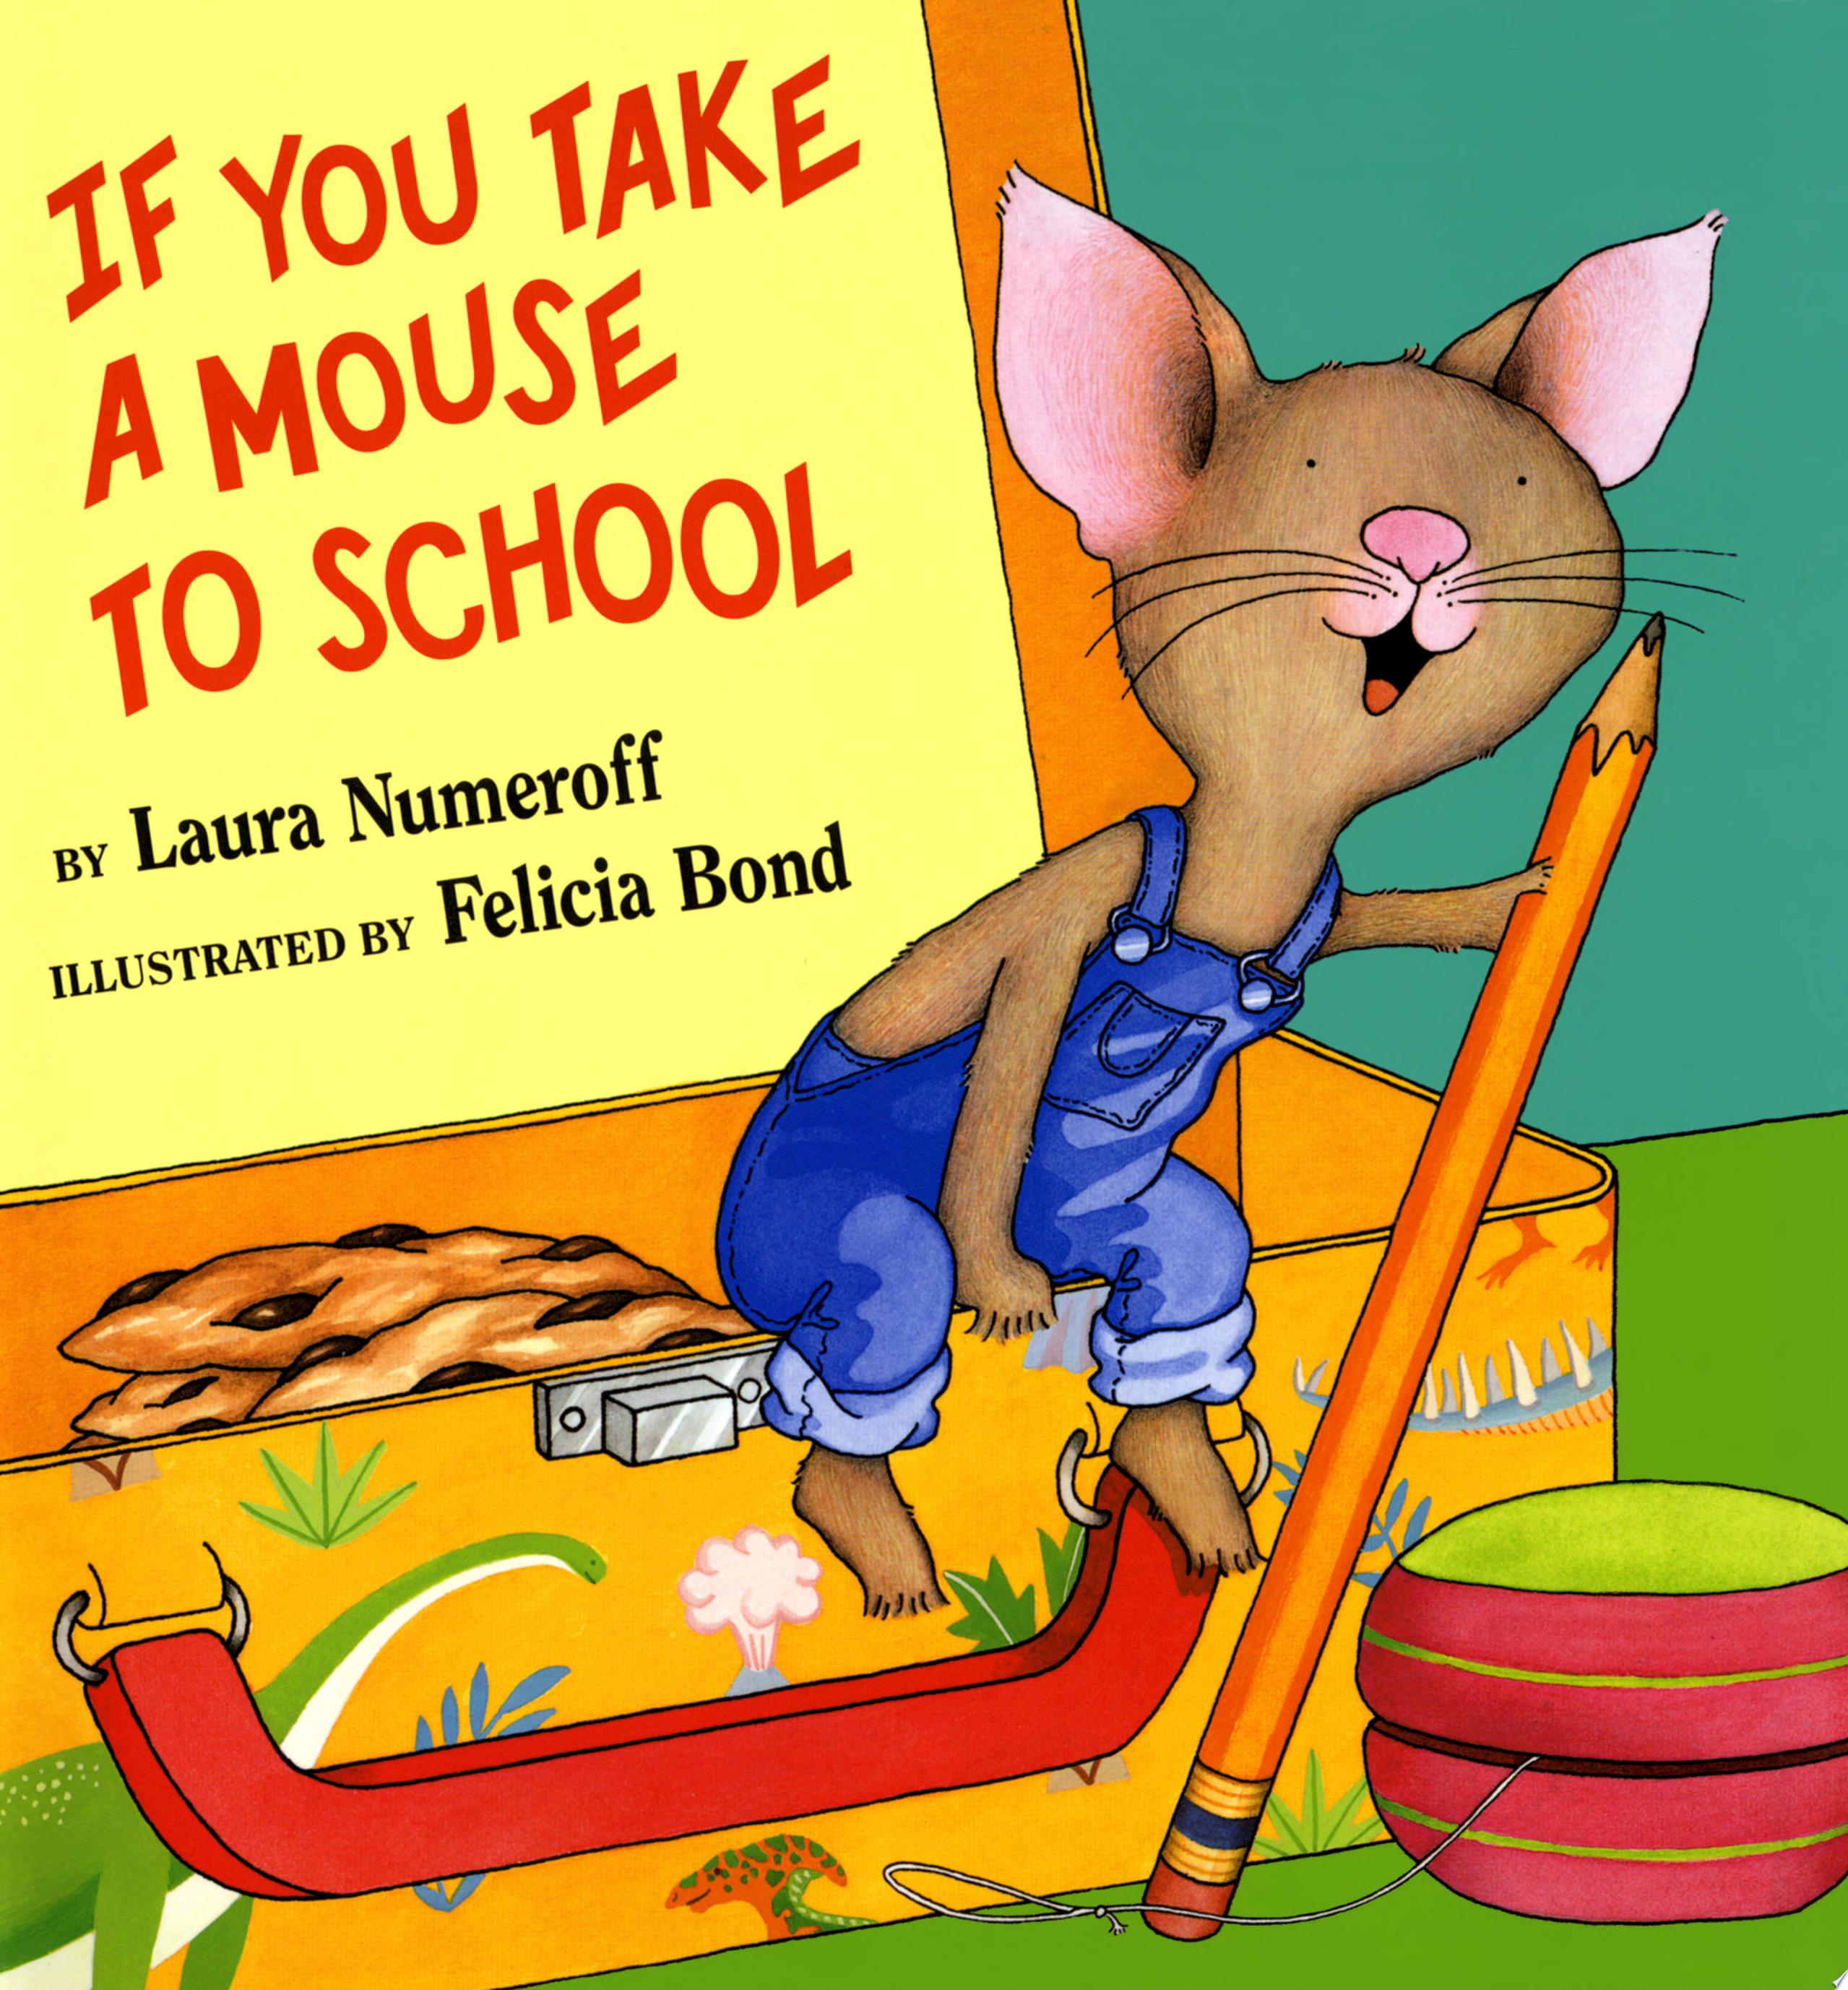 Image for "If You Take a Mouse to School"